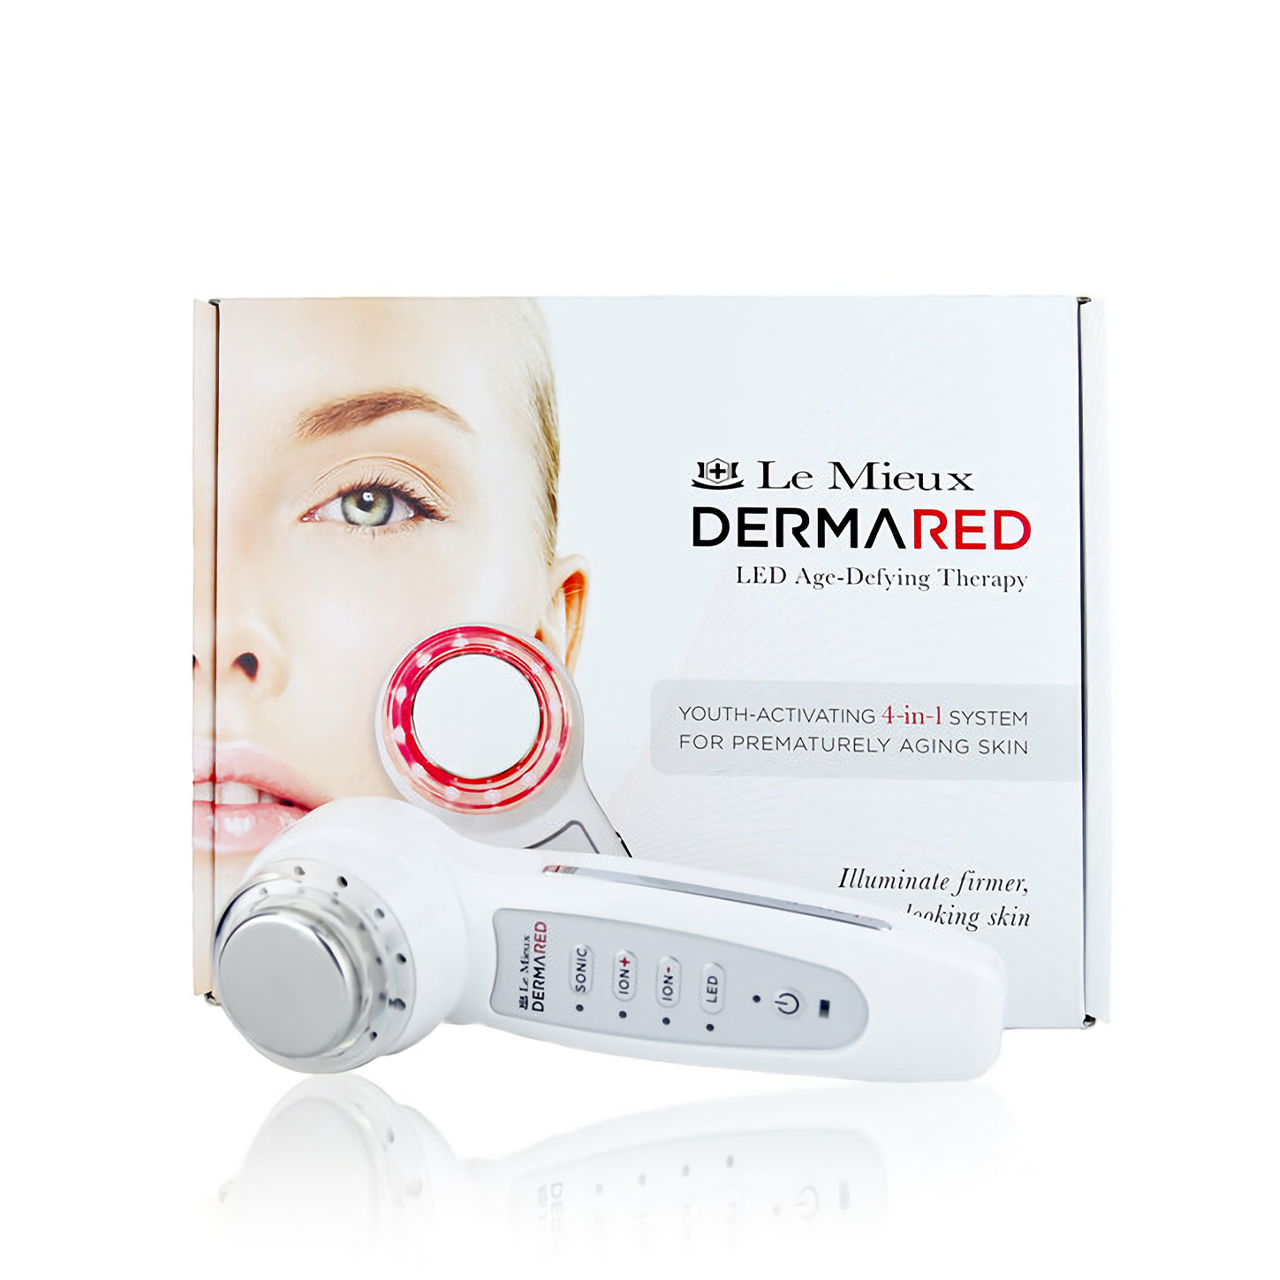 Le Mieux DermaRed LED Age-Defying Therapy Questions & Answers